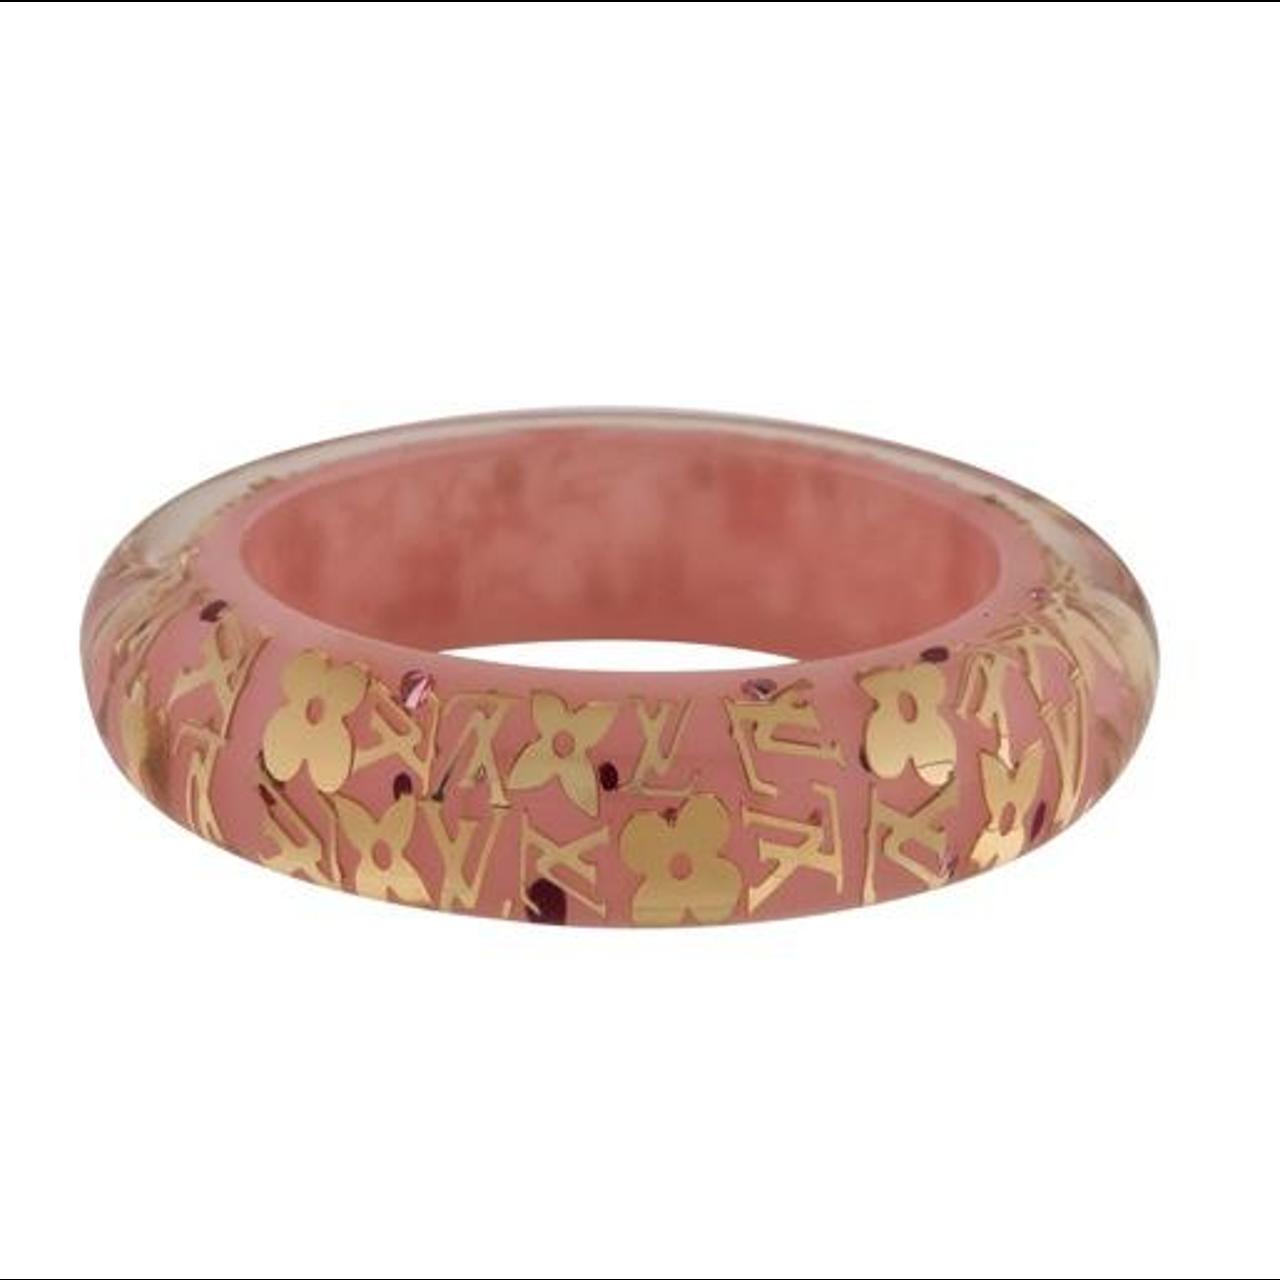 LOUIS VUITTON Inclusion Tangerine Bangle – The Find